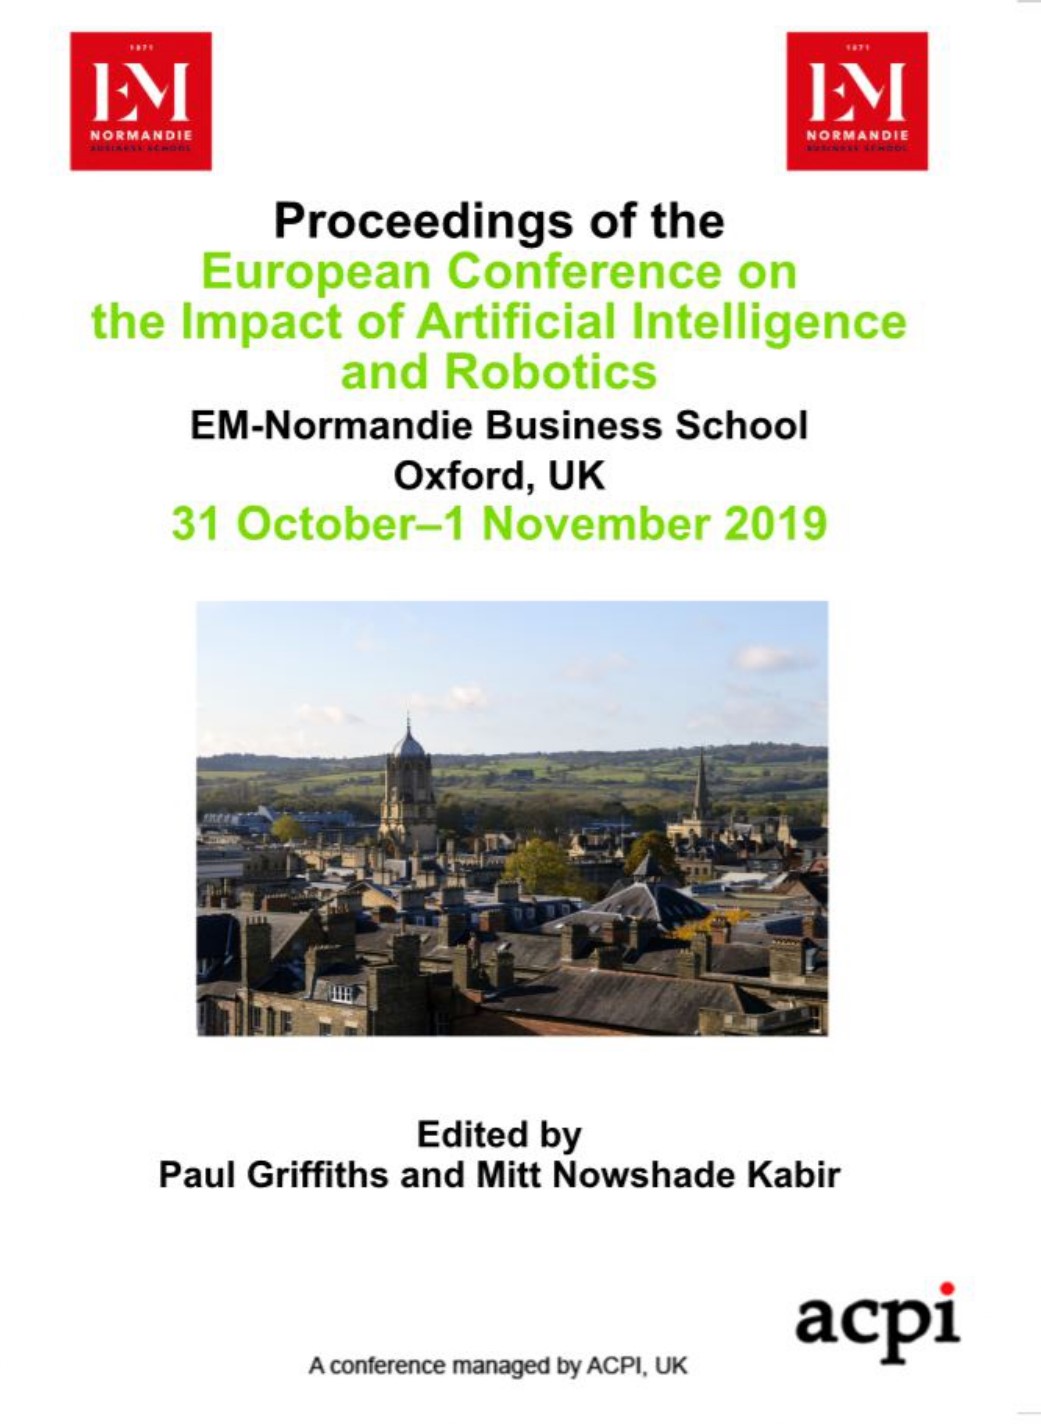 Proceedings of the European Conference on the Impact of Artificial Intelligence and Robotics